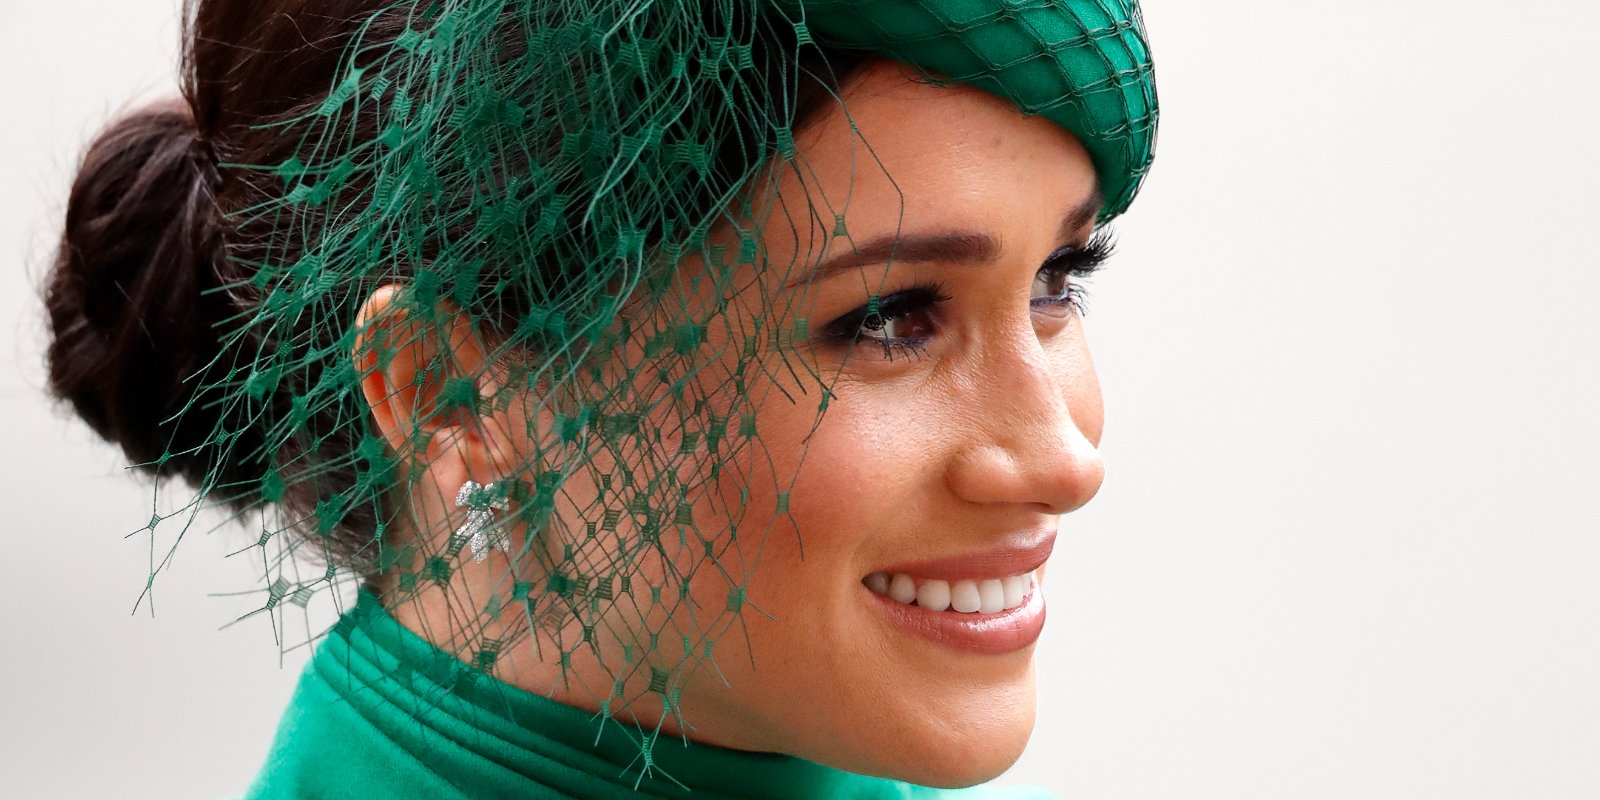 Meghan Markle wears a green hat and dress to Commonwealth day in 2020.